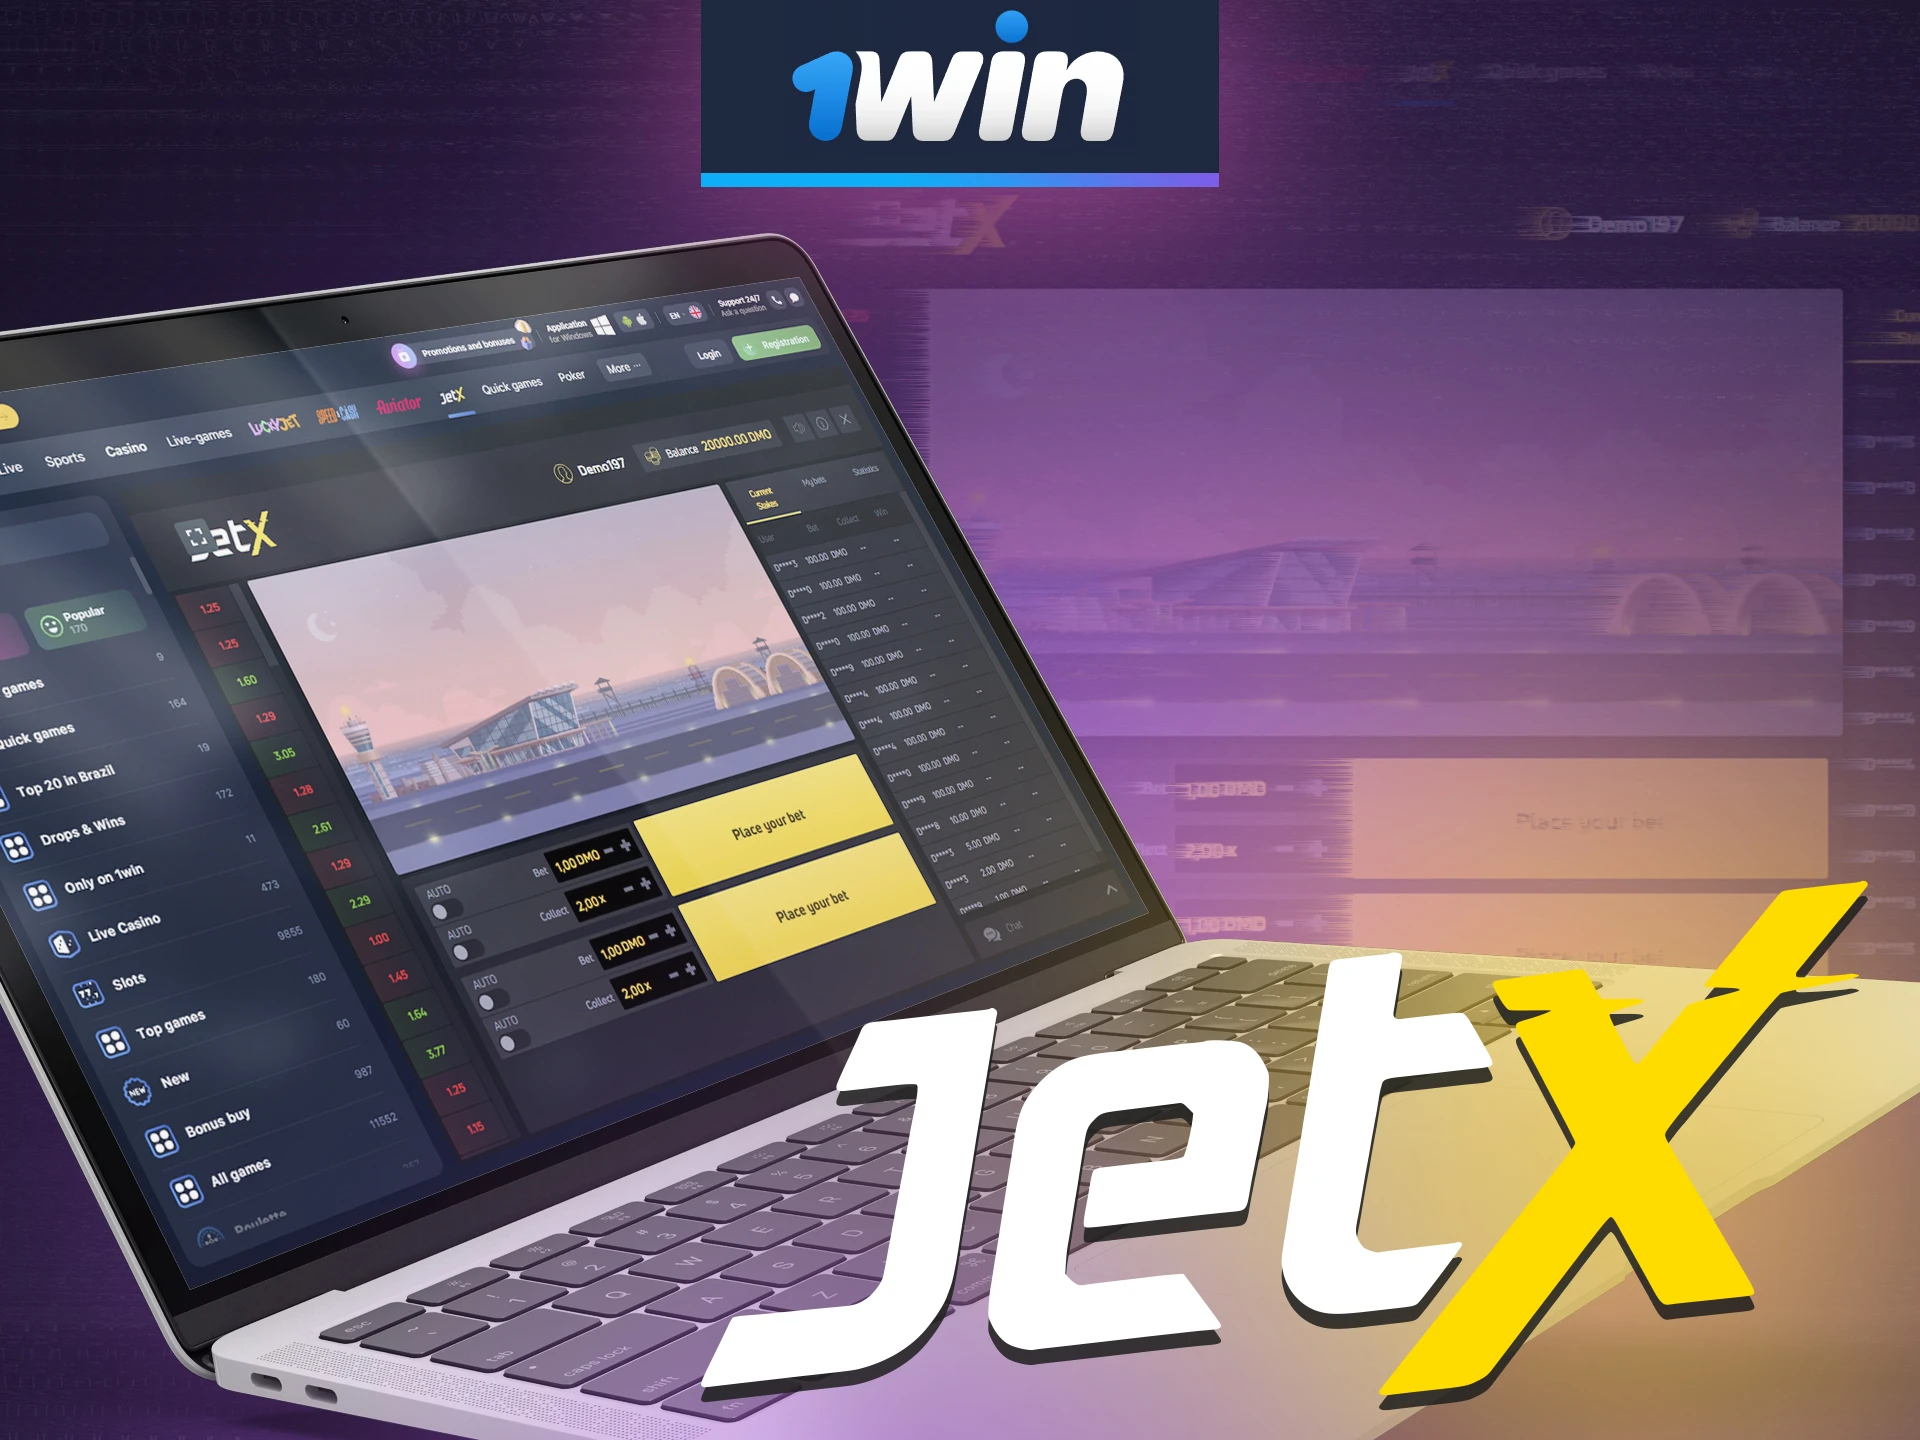 Make your winning bet at 1win in the Jet X game.